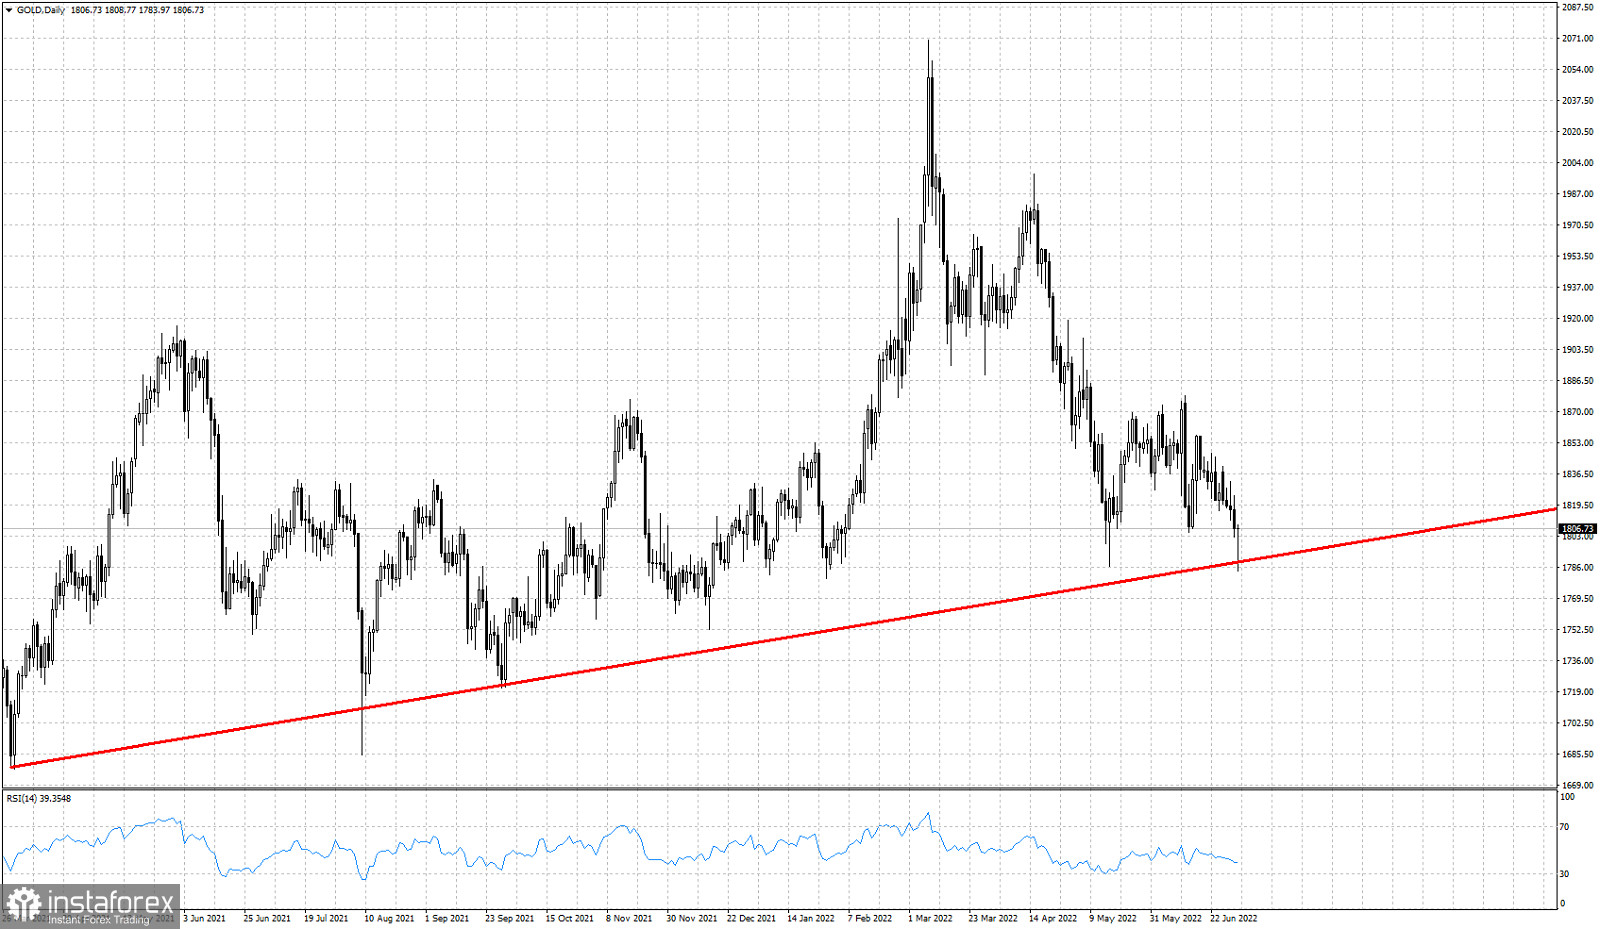 Gold continues to respect key long-term support trend line at $1,790-$1,800.